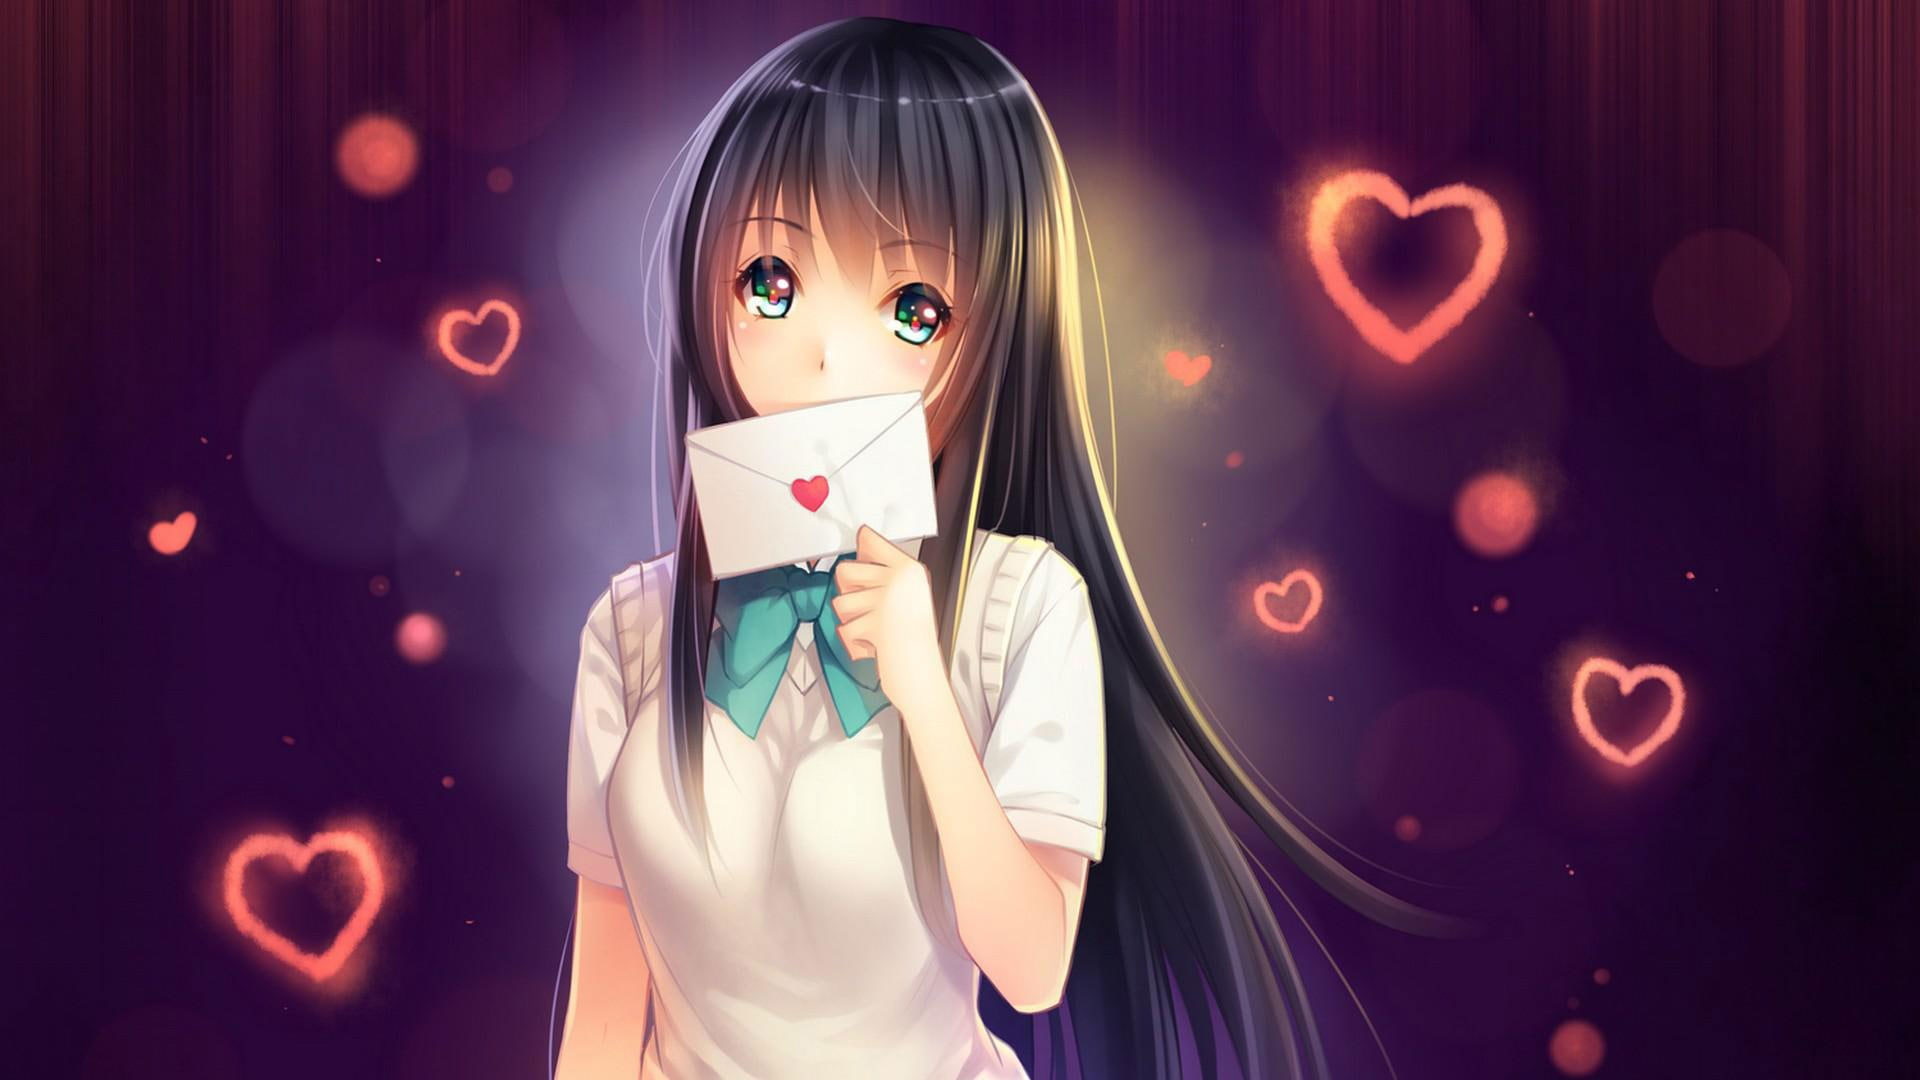 Love letter addressed to you wallpaper